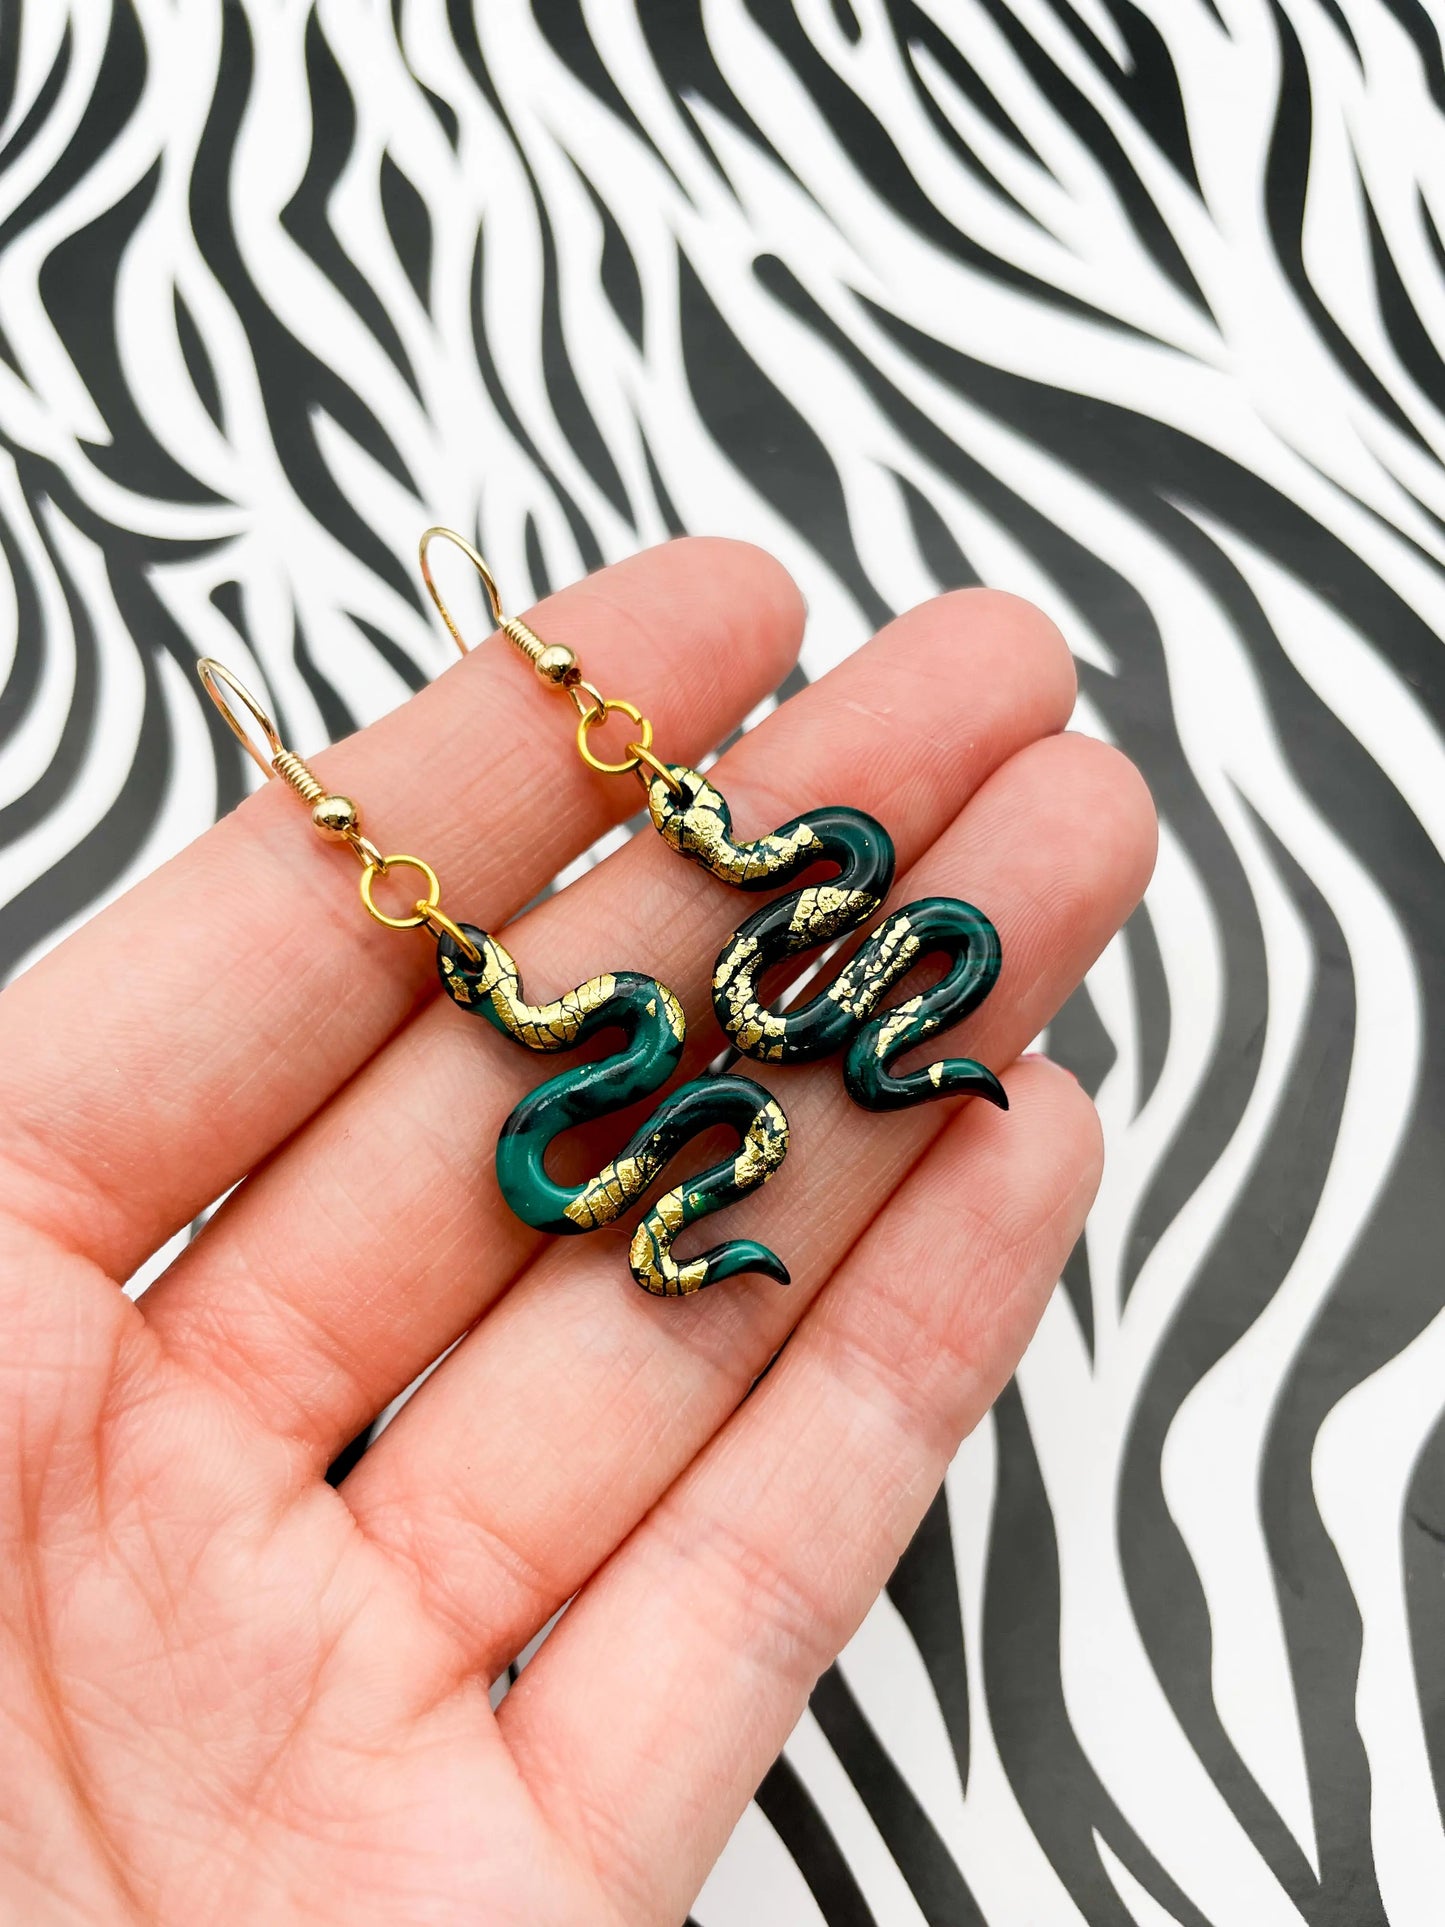 Small Emerald and Black Marble with Gold Foil Snake Dangle Earrings from Sapphire Frills